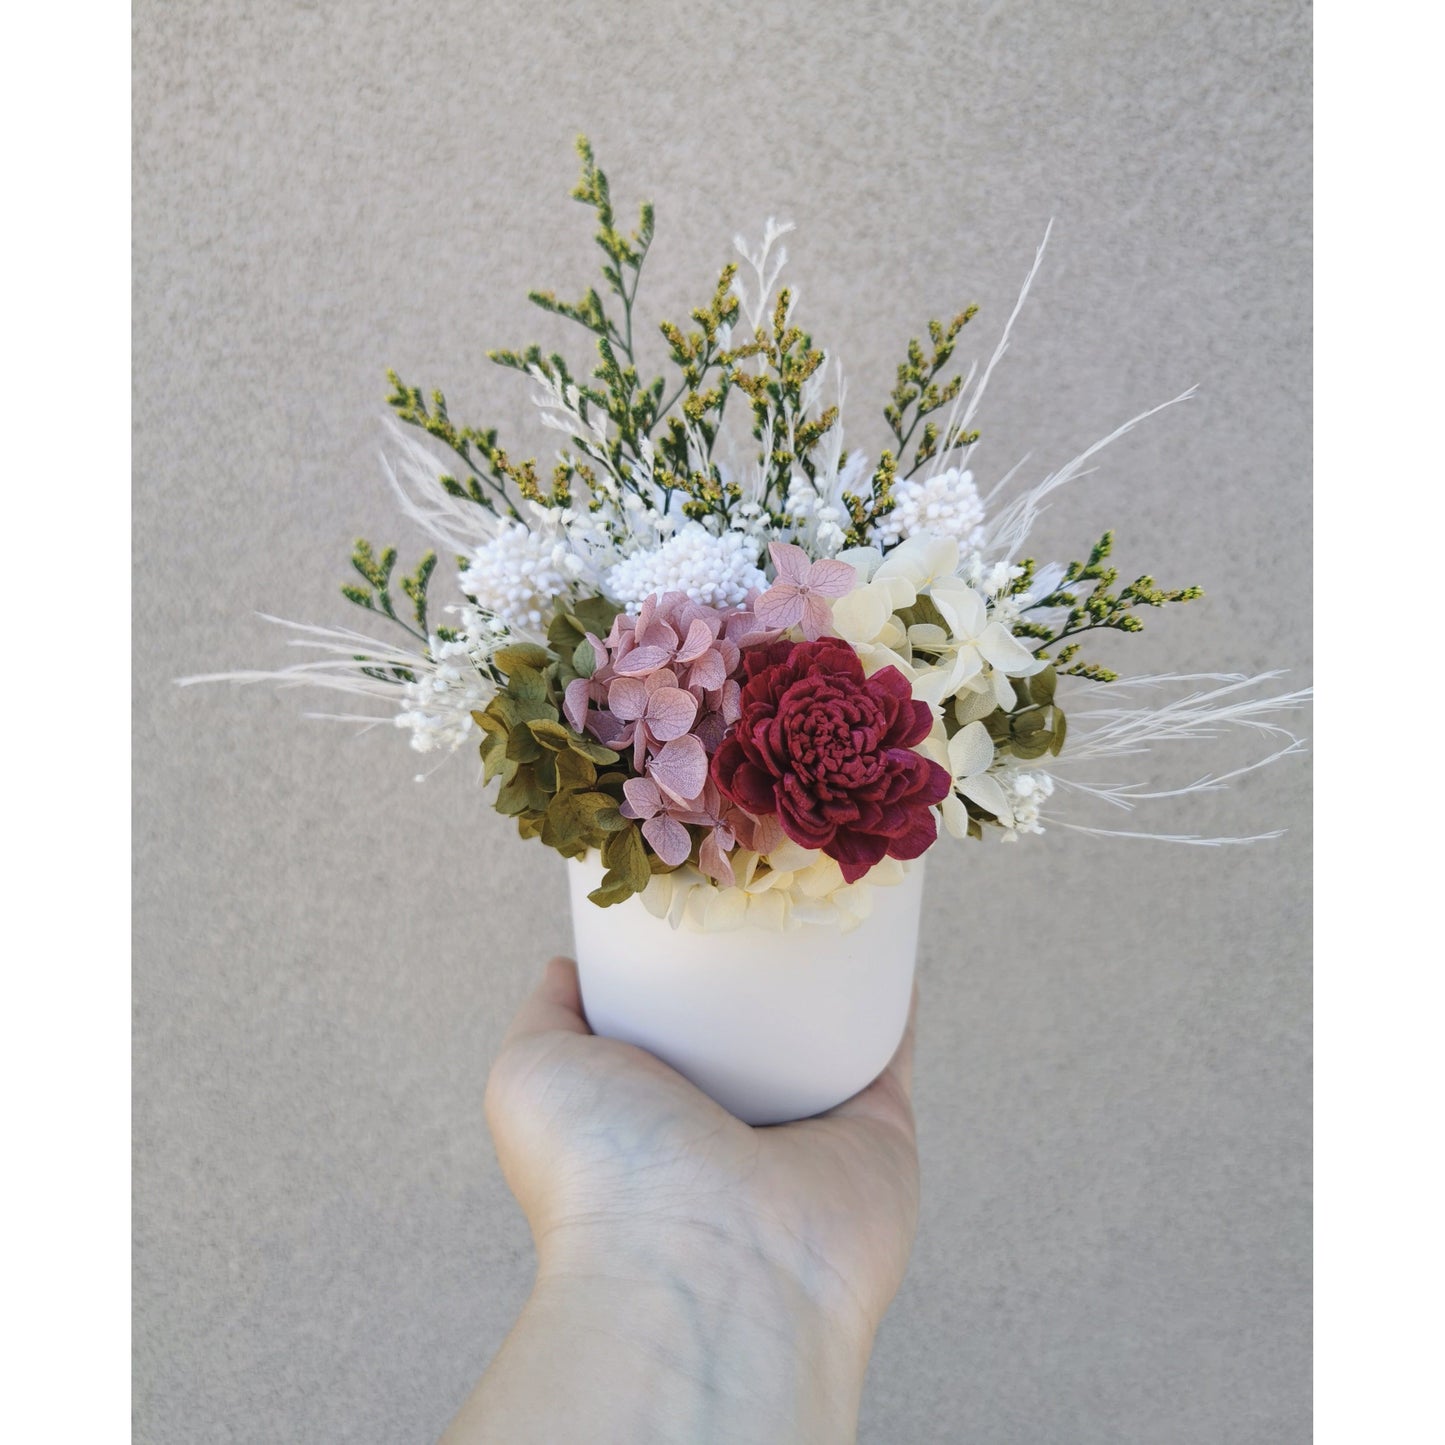 Dried & Preserved flower arrangement with green , white, yellow, pink & burgundy colours. Photo shows arrangement being held by hand in front of a blank wall with a closer view of flowers